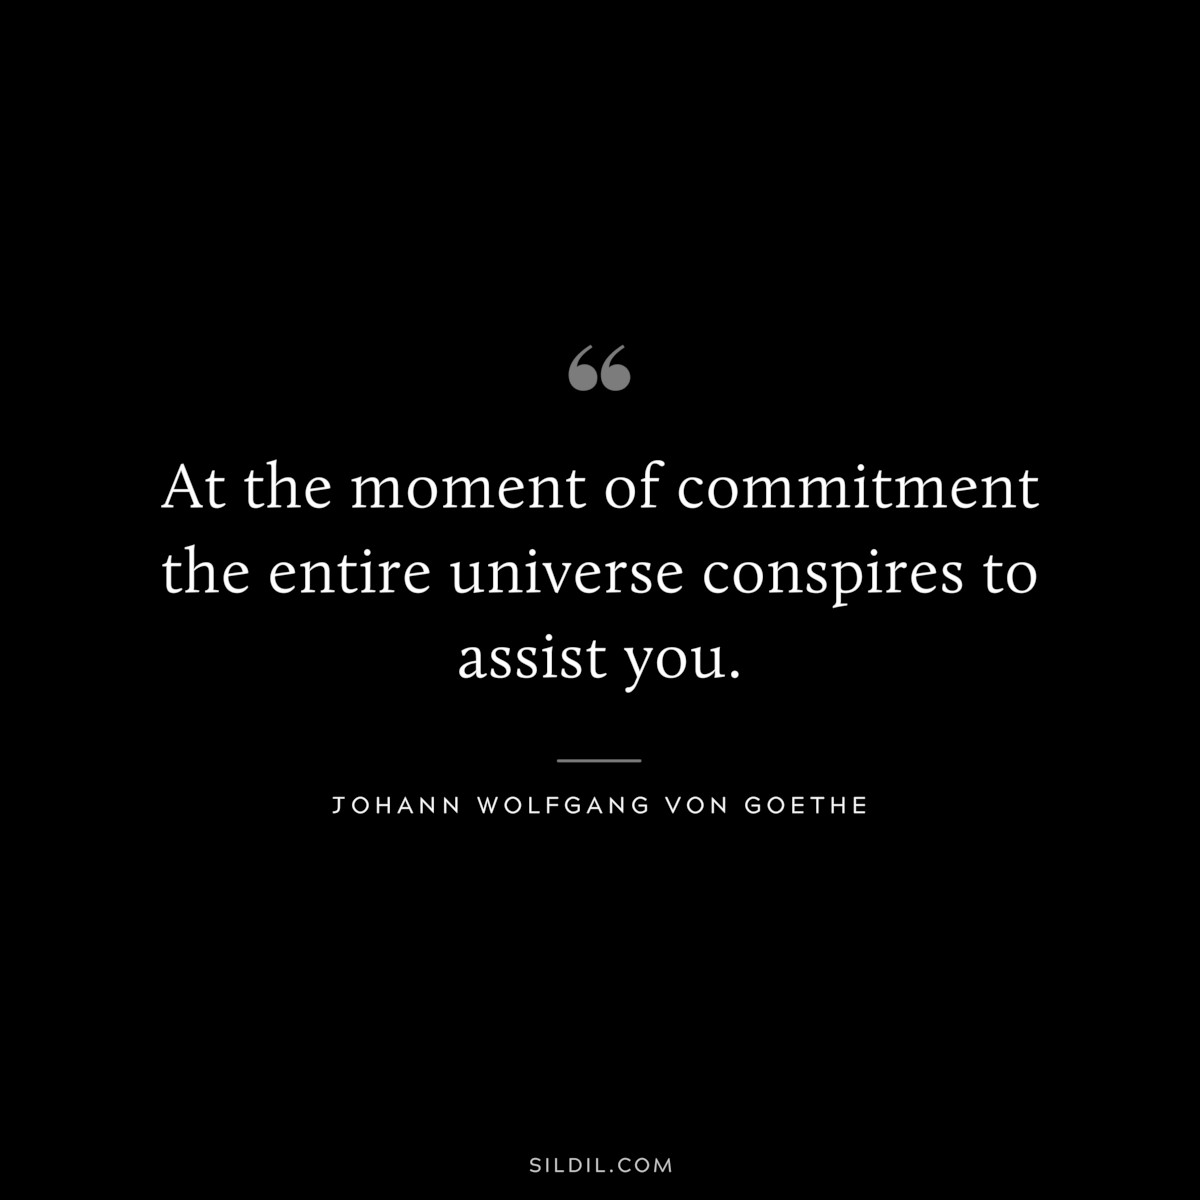 At the moment of commitment the entire universe conspires to assist you.― Johann Wolfgang von Goethe